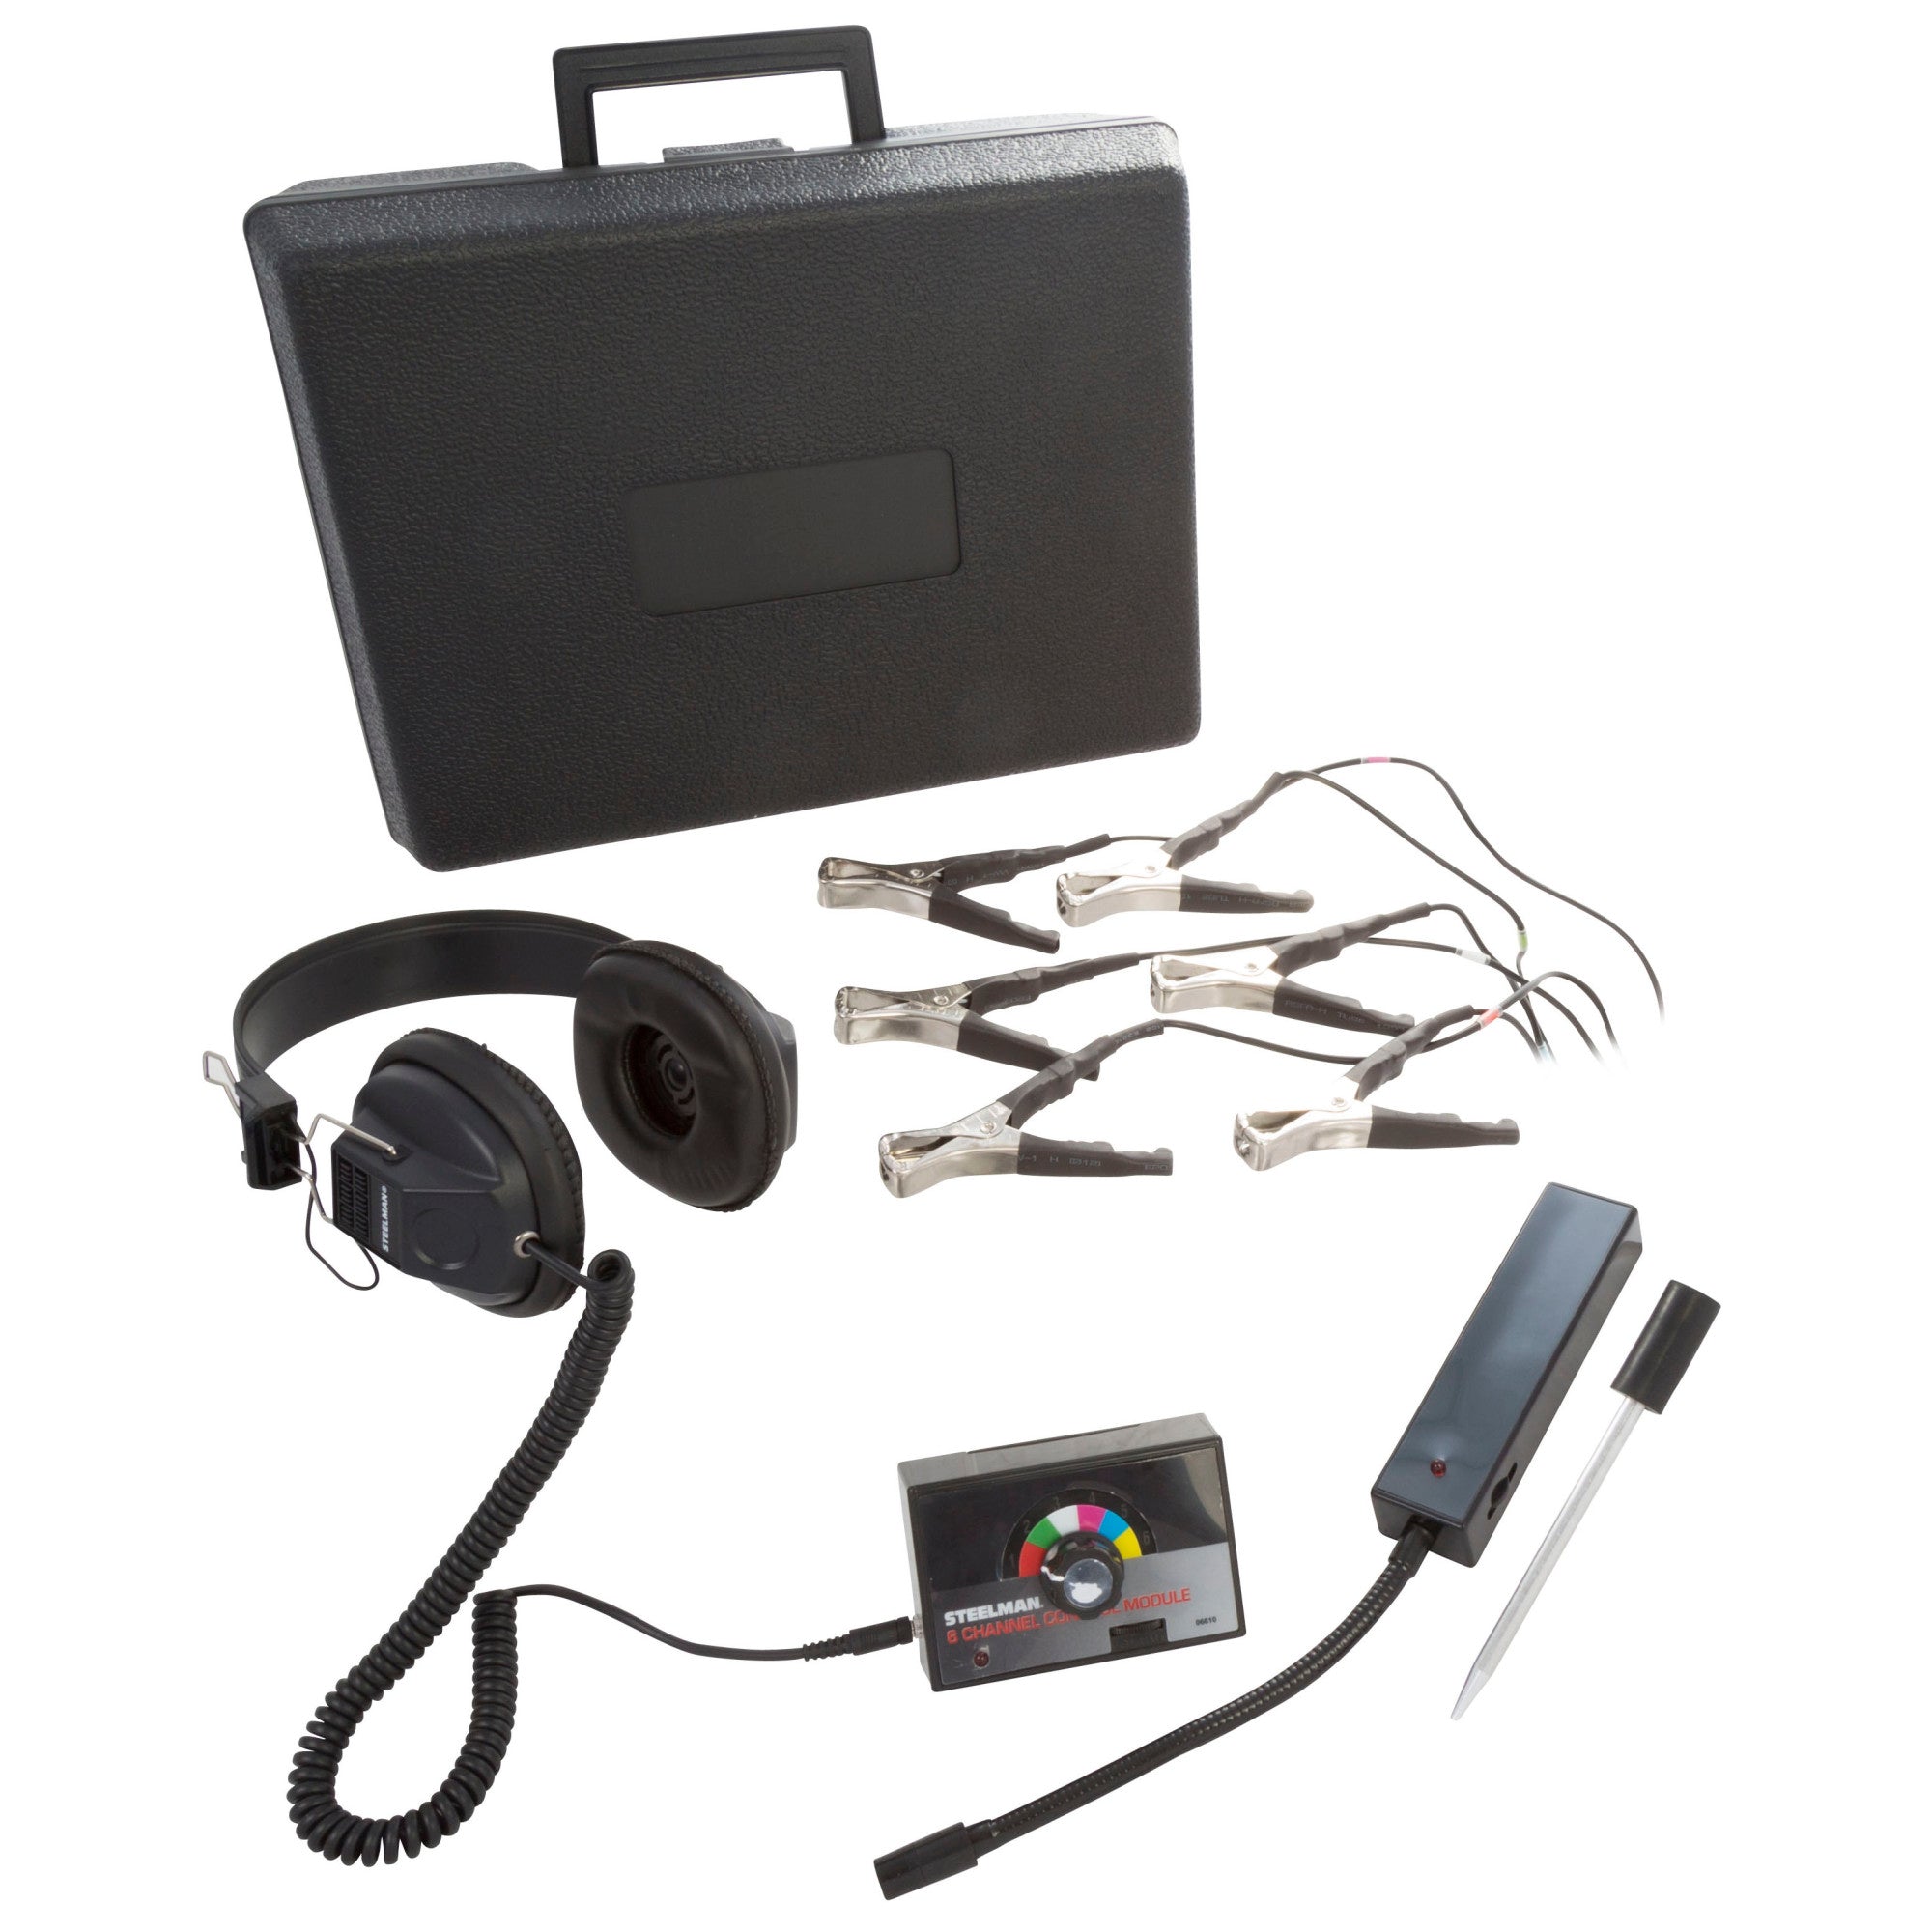 Steelman Chassisear And Engineear Auto Diagnostic Combination Kit